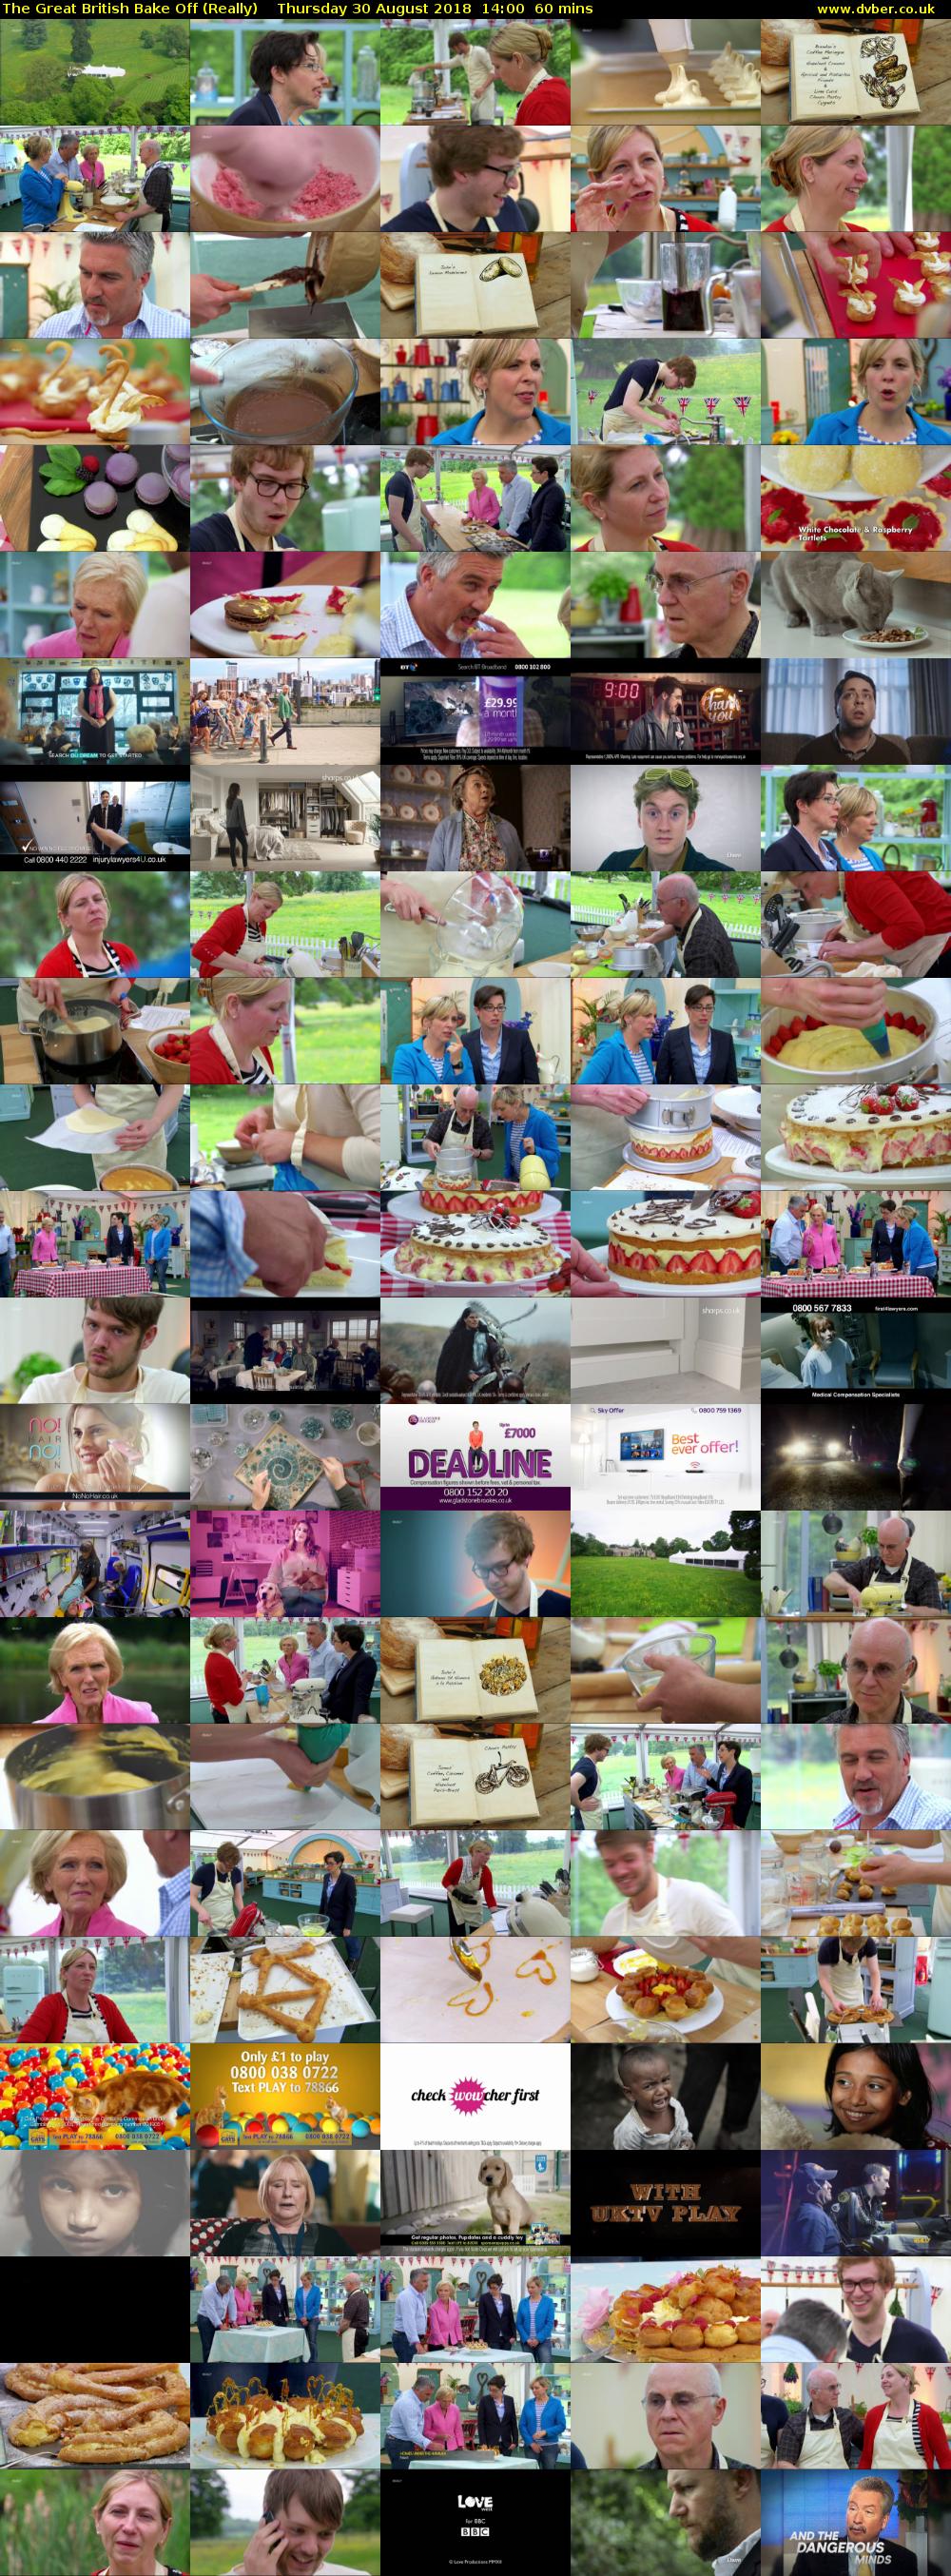 The Great British Bake Off (Really) Thursday 30 August 2018 14:00 - 15:00